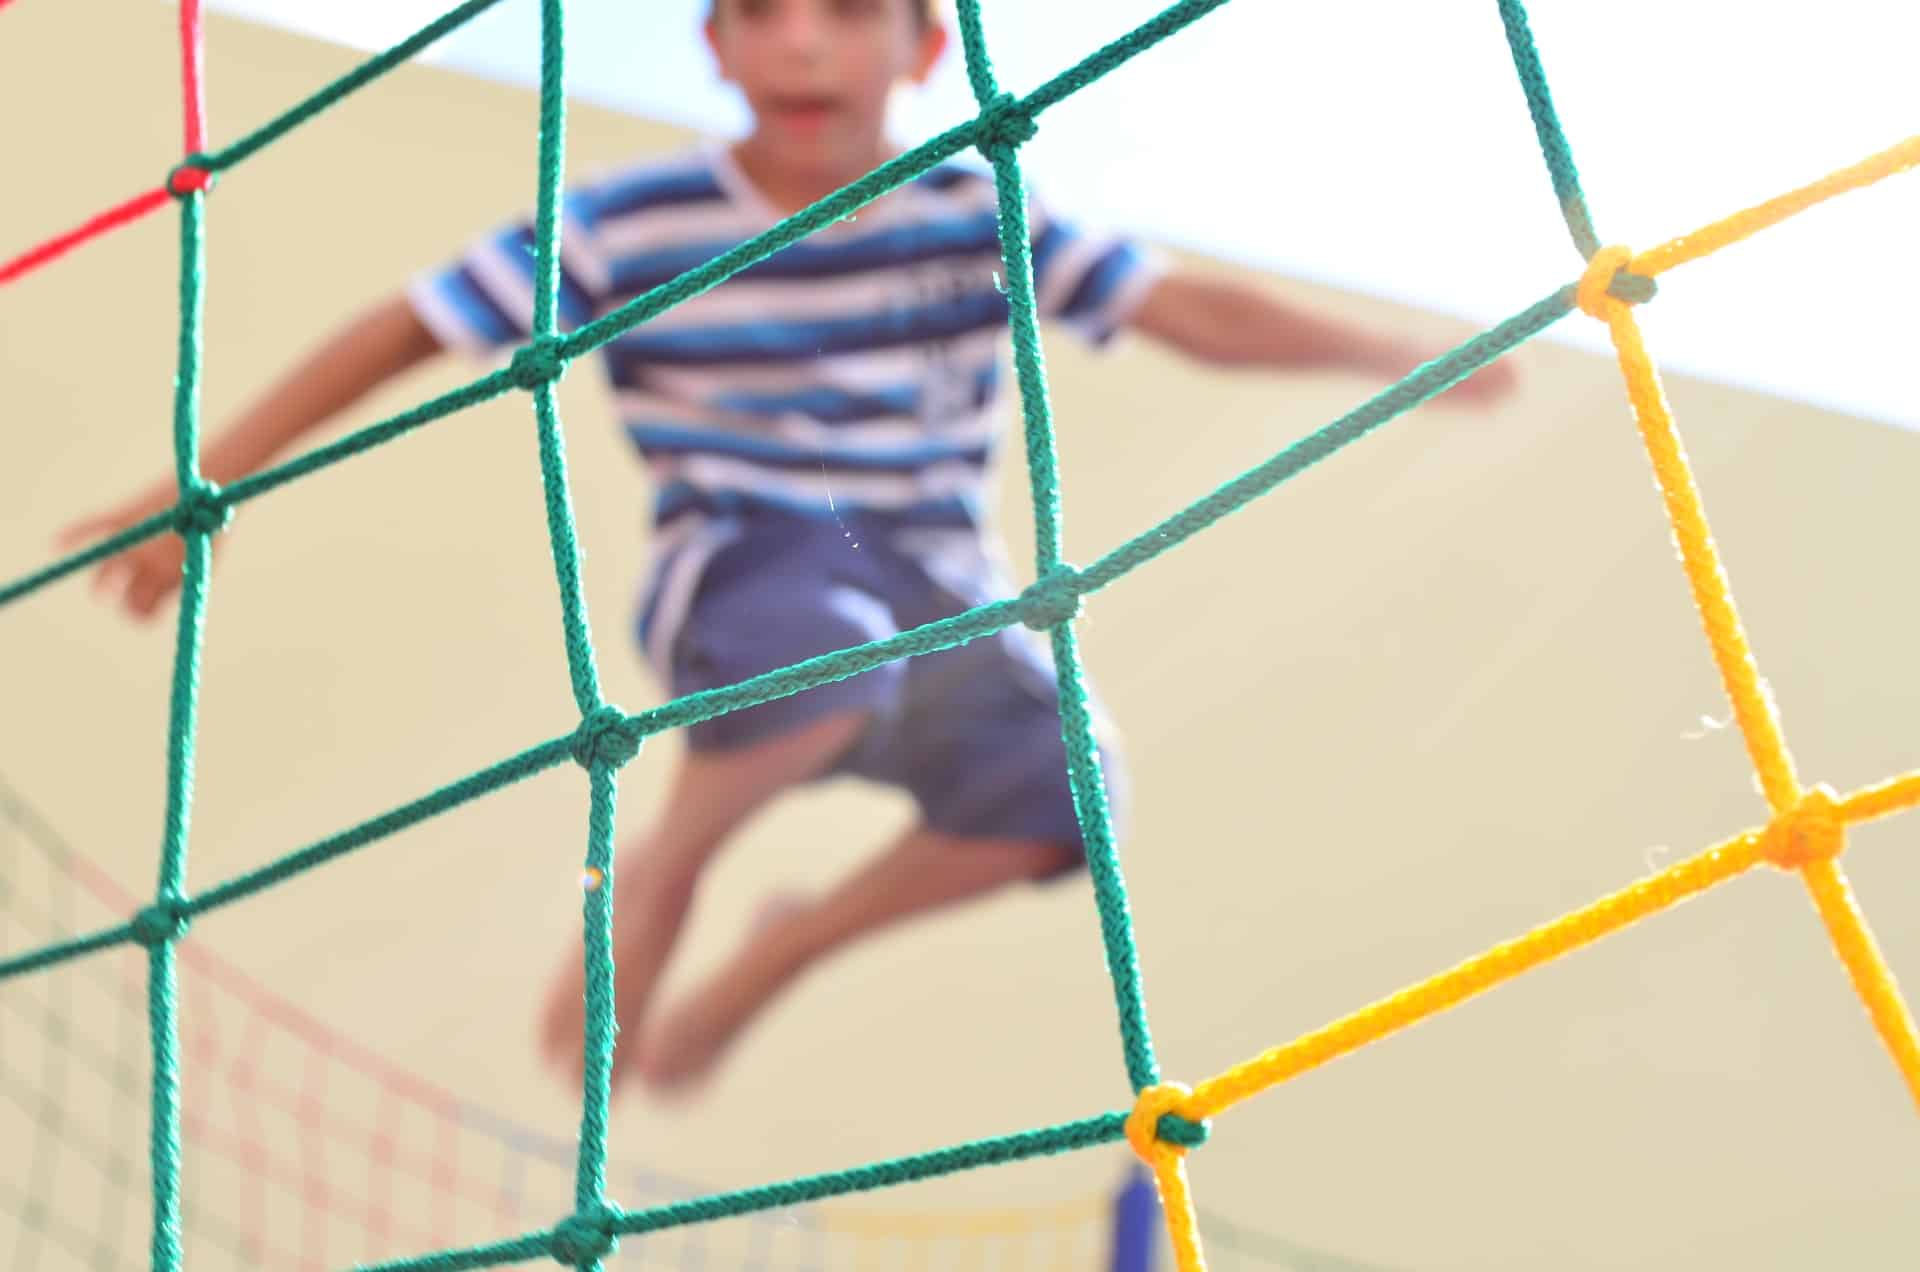 boy in blue and white shirt jumping on trampoline